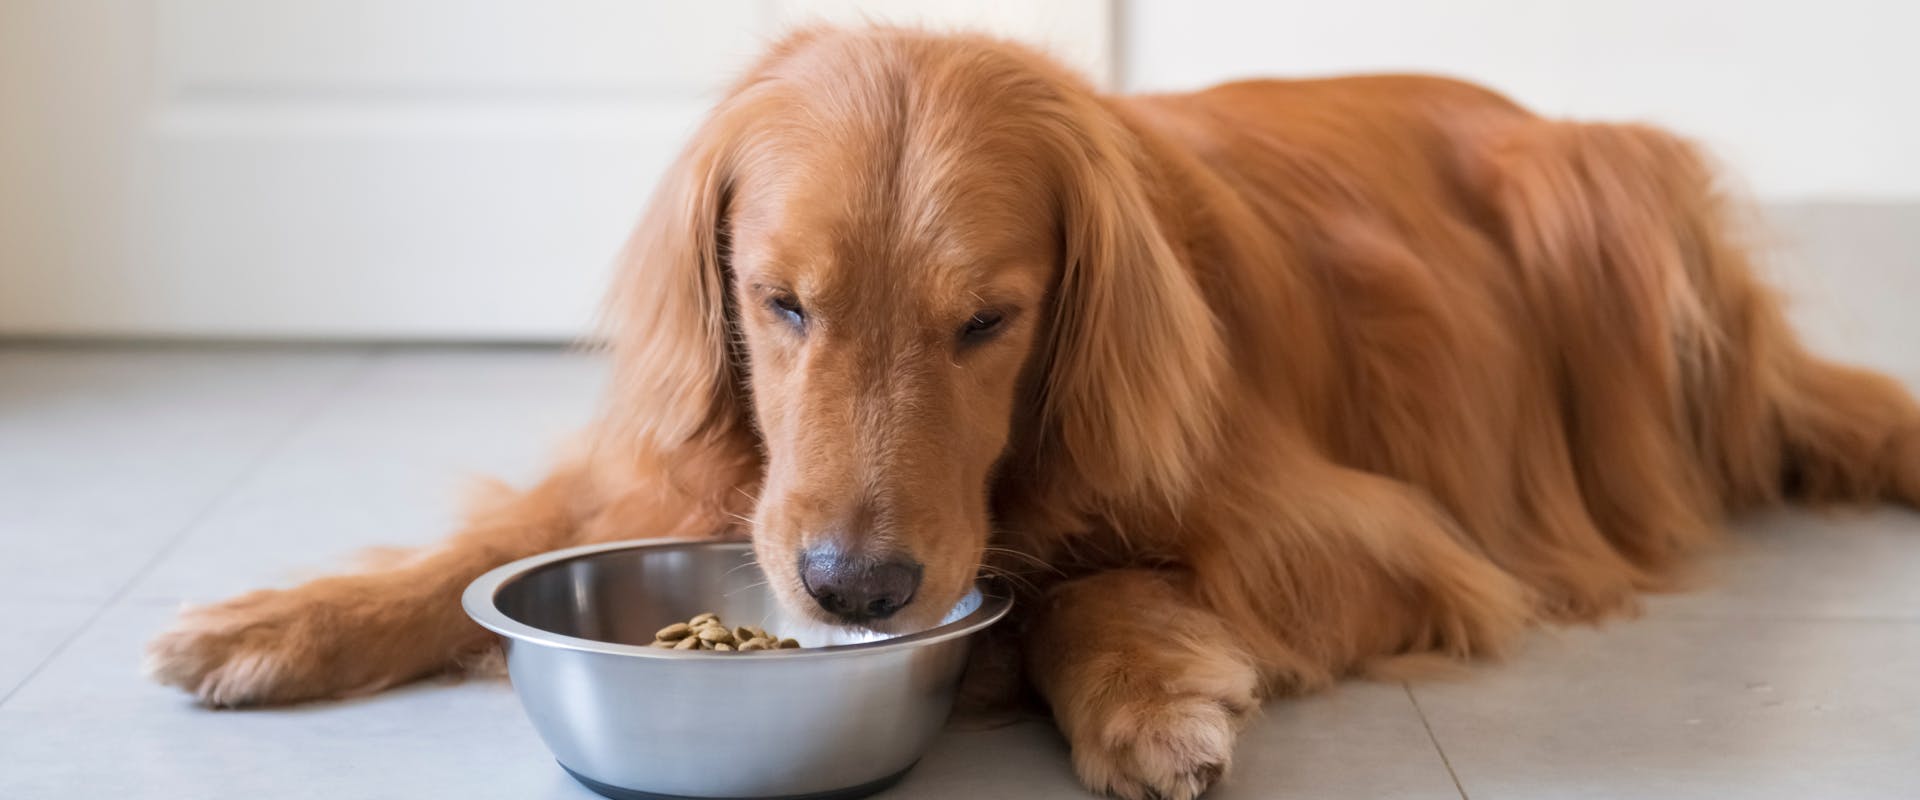 a golden retriever lying on a kitchen floor whilst eating out of a silver food bowl